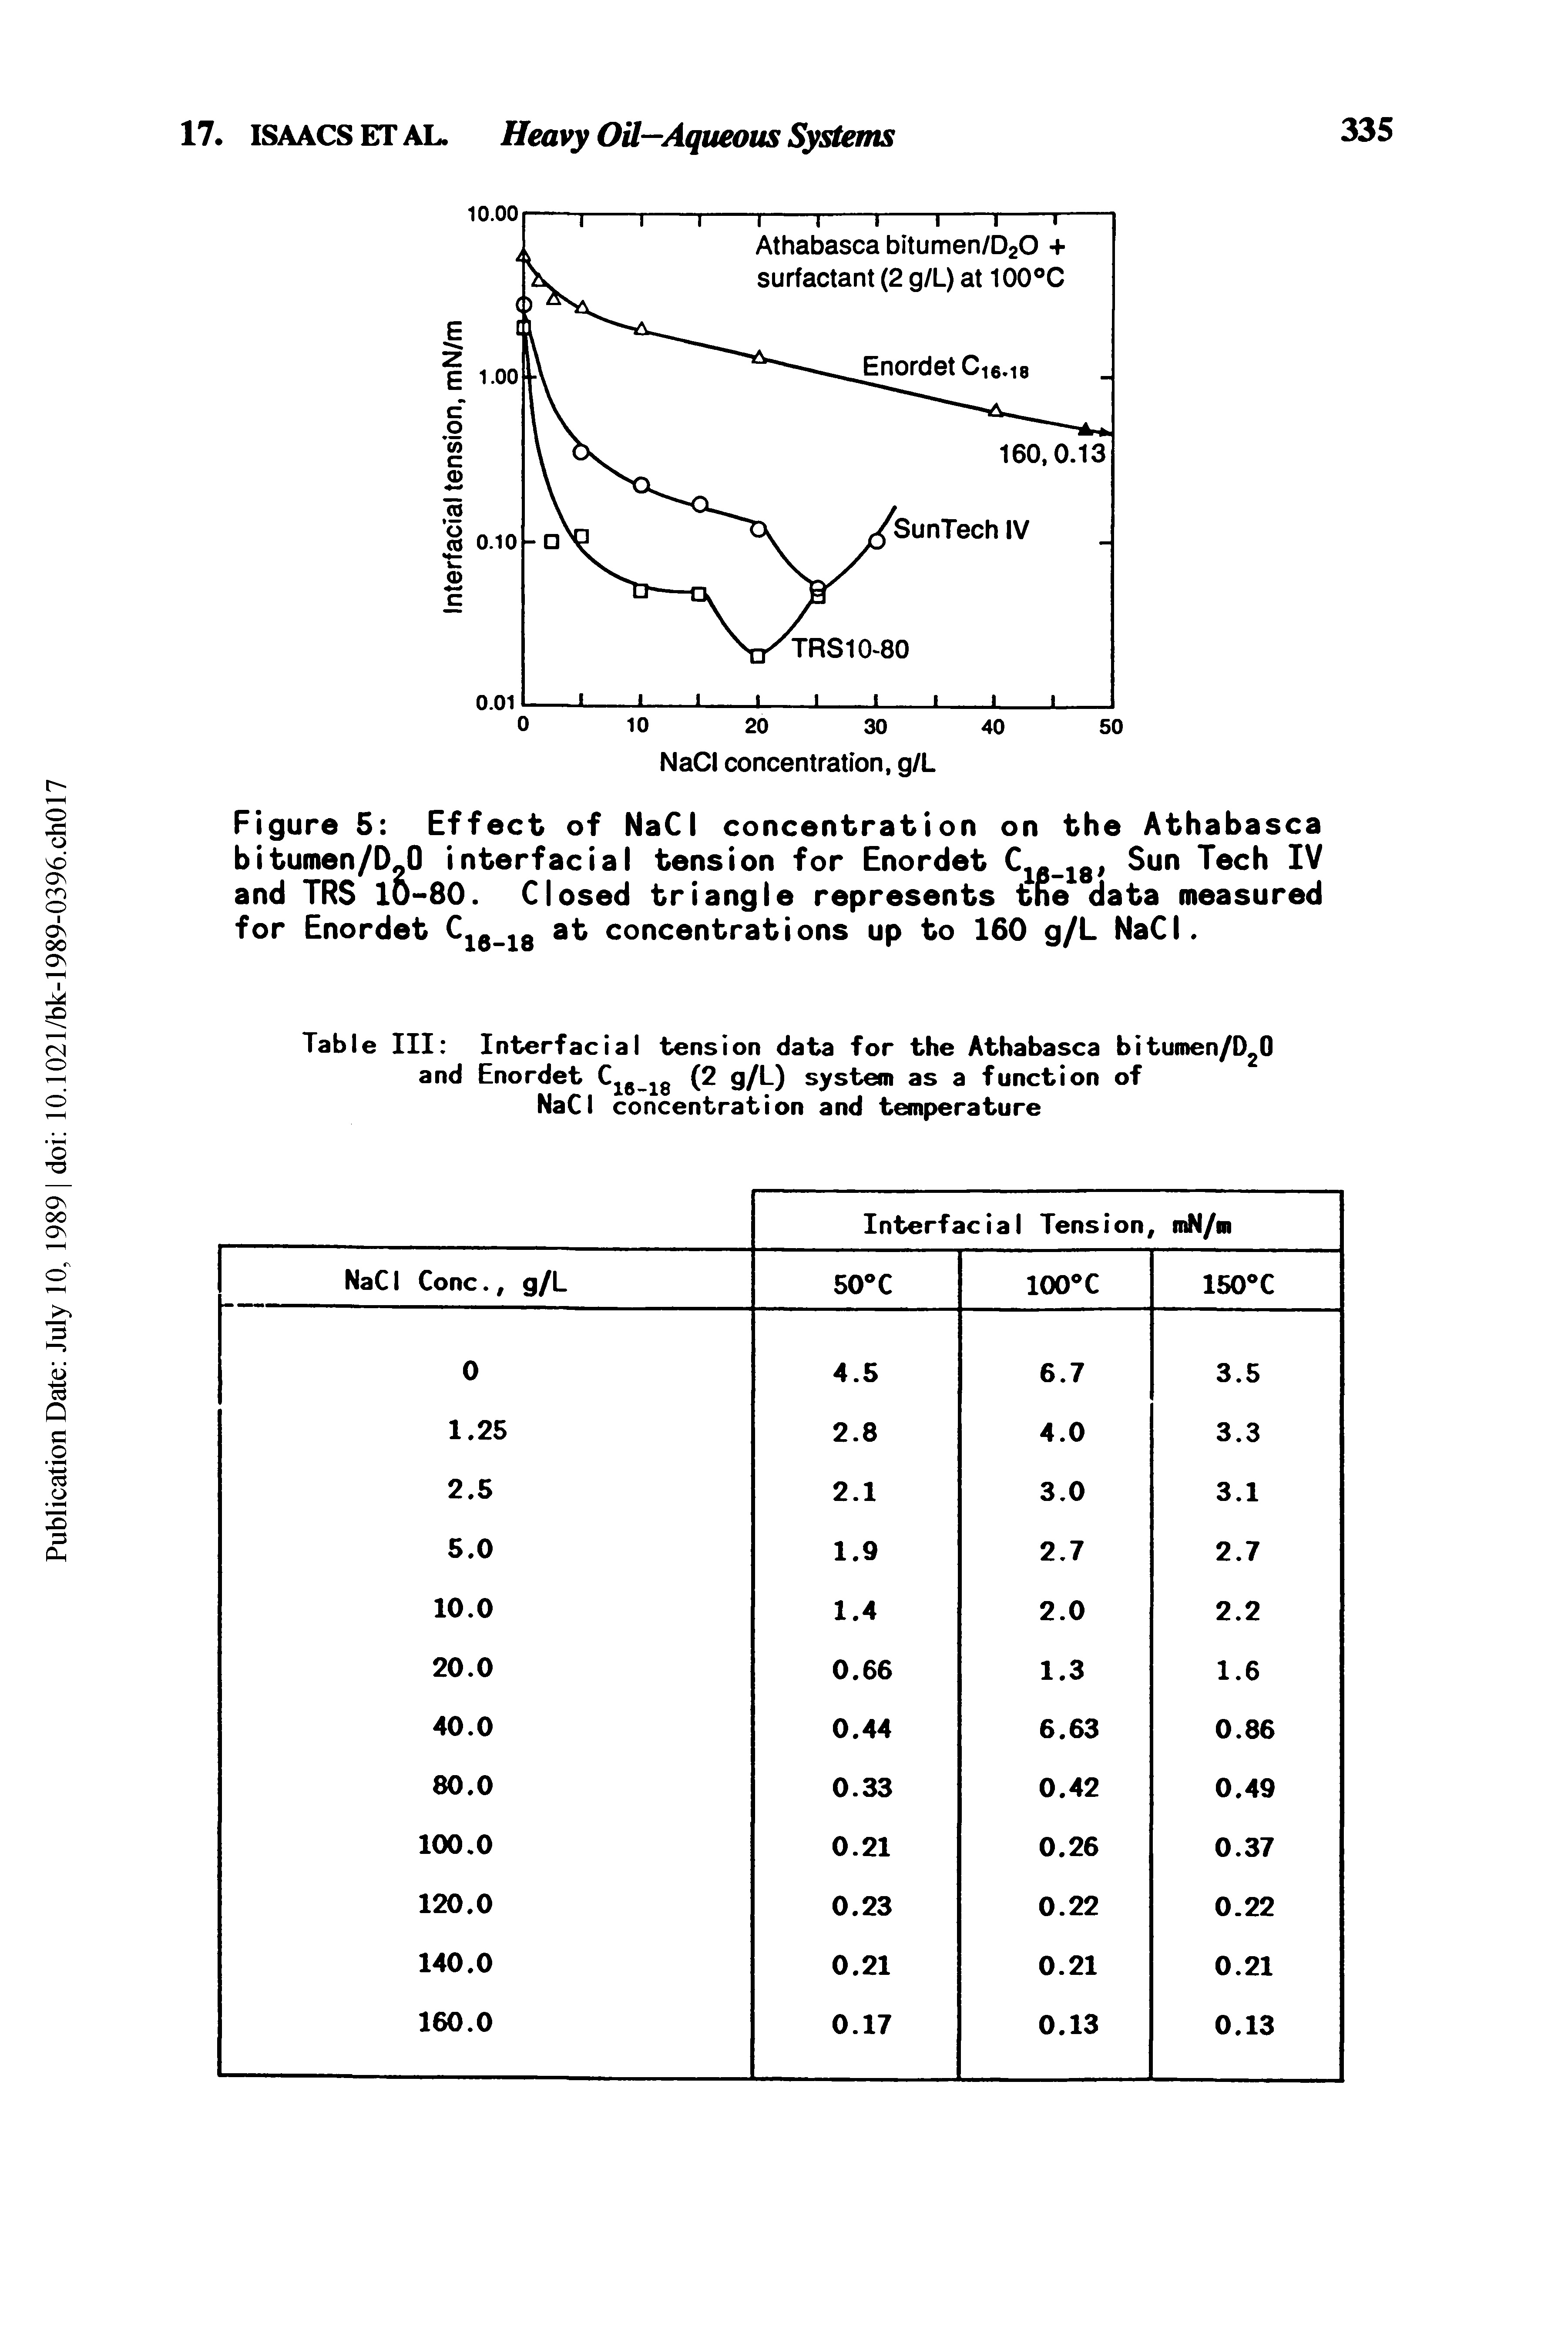 Figure 5 Effect of NaCI concentration on the Athabasca bitumen/DJ) interfacial tension for Enordet C18 18, Sun Tech IV and TRS 10-80. Closed triangle represents the data measured for Enordet C16 18 at concentrations up to 160 g/L NaCI.